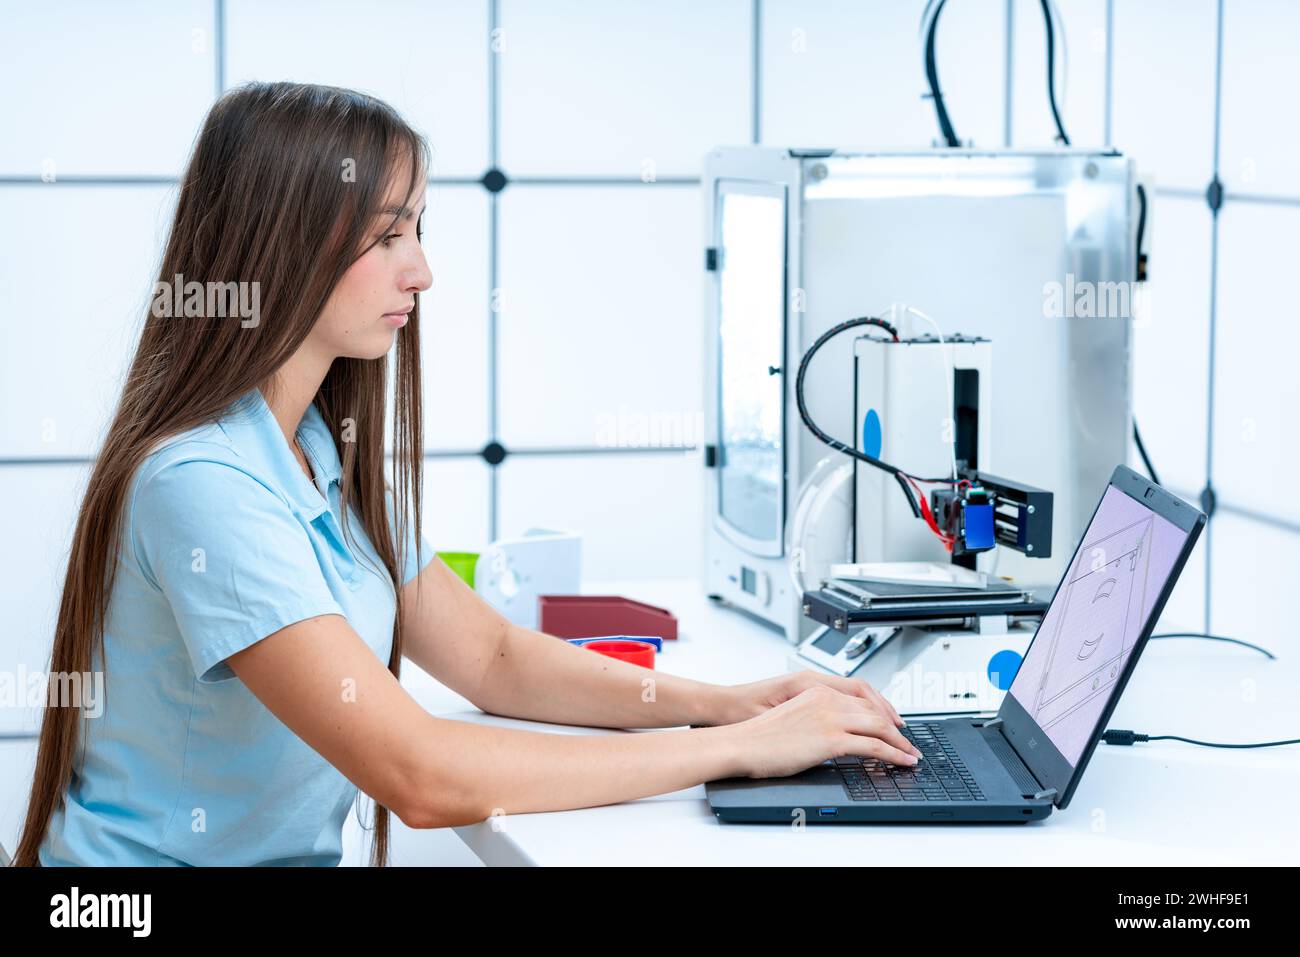 Scientist working with 3D printer Stock Photo